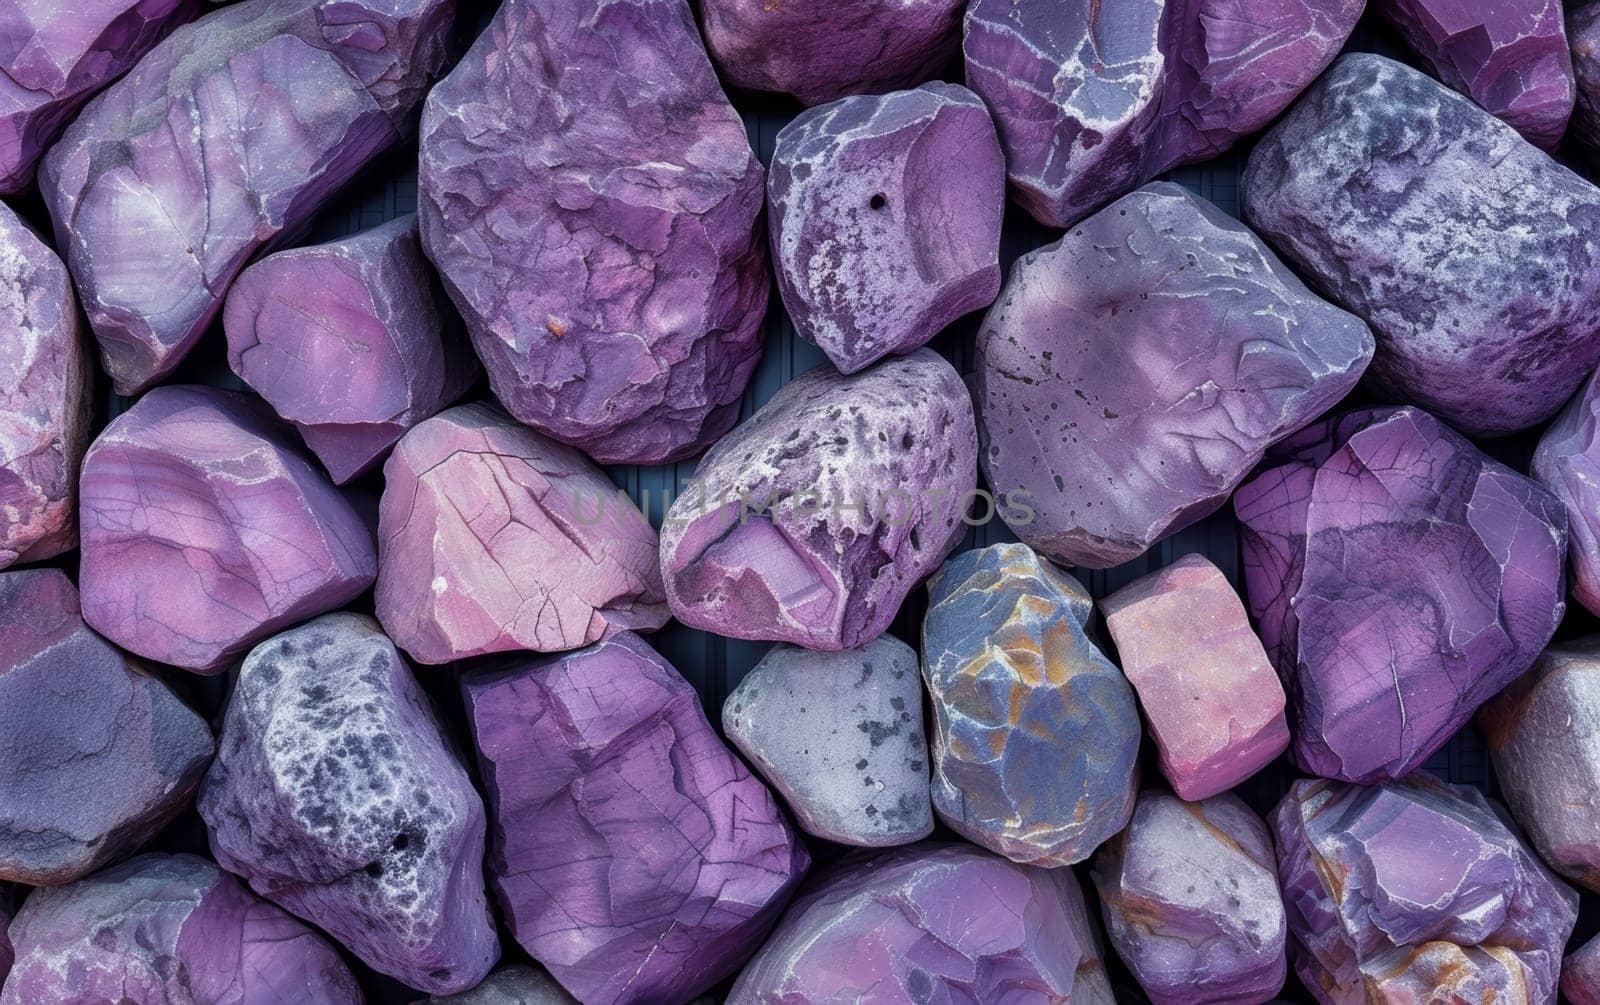 Layered purple stone cladding with varied shapes and a rough, textured appearance. by sfinks